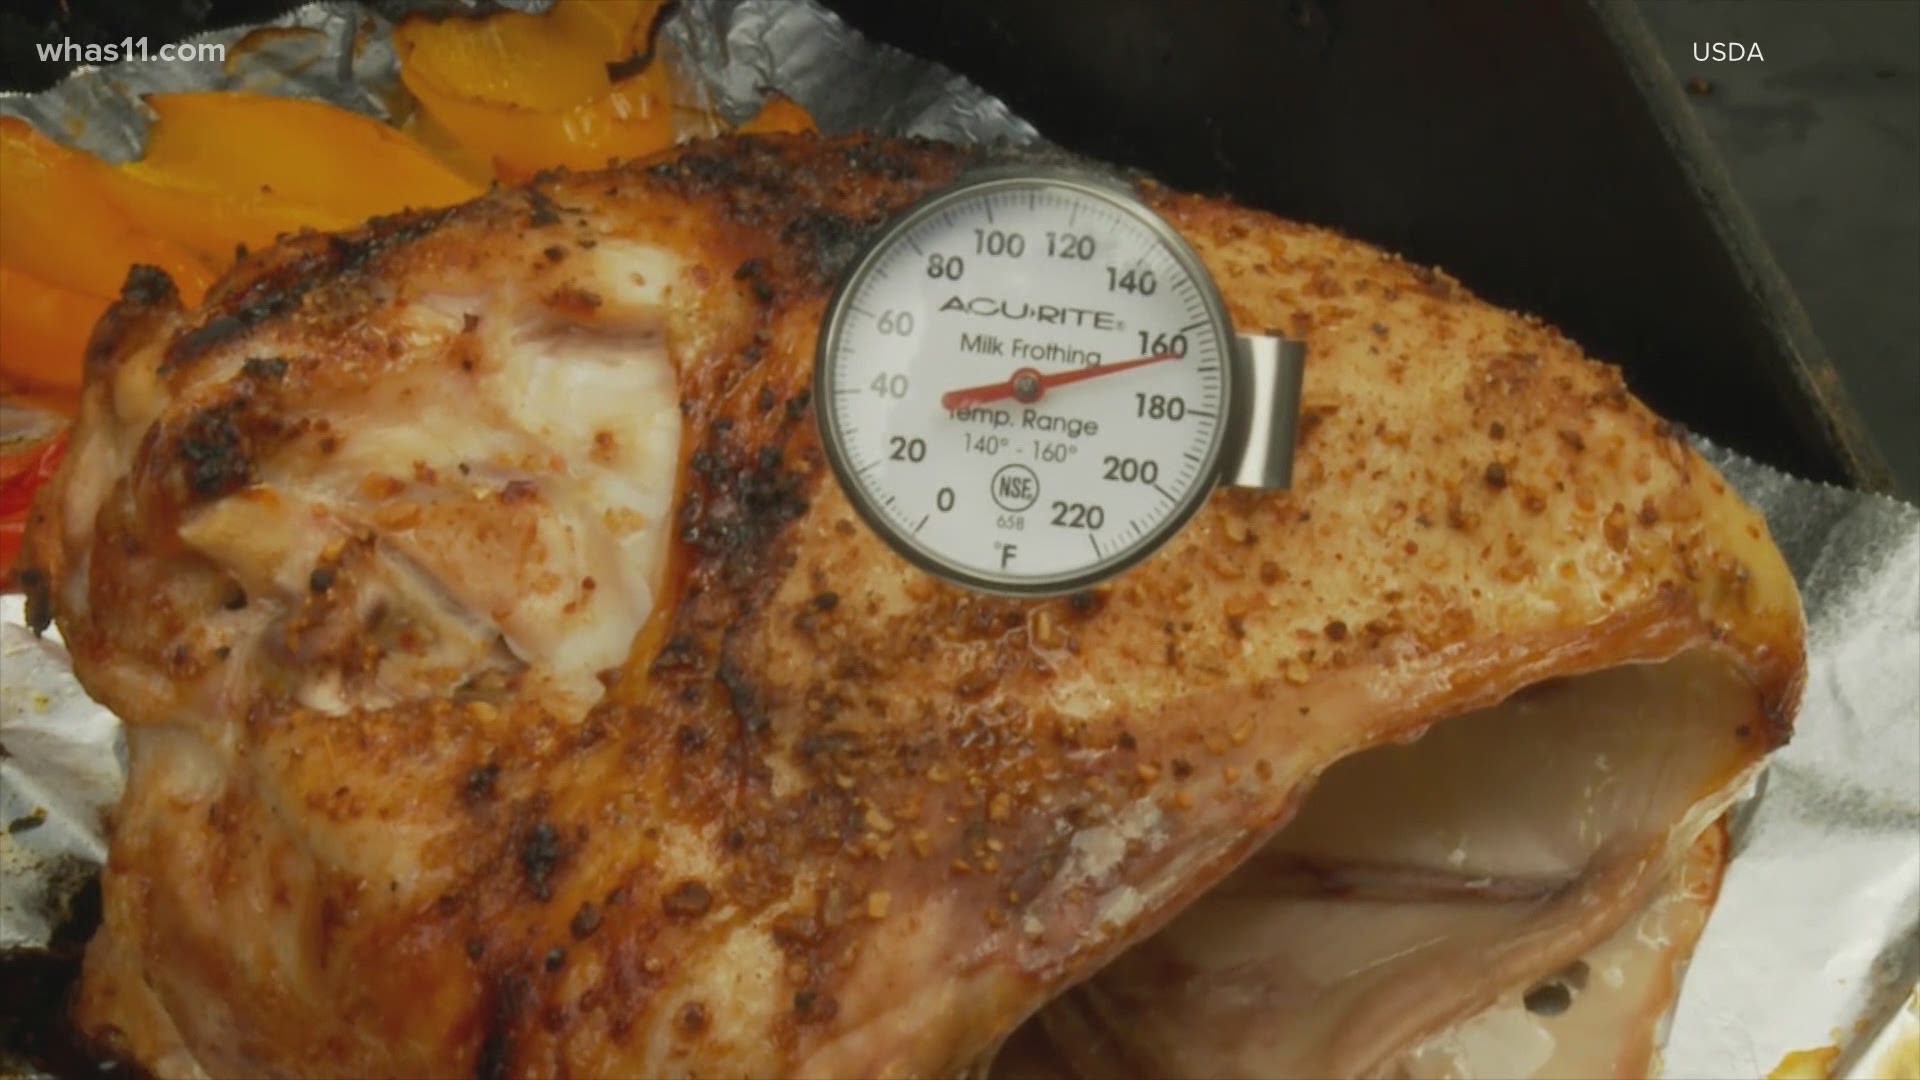 If you're cooking a turkey for the first time this year, here are some tips on how to make sure you cook it right.